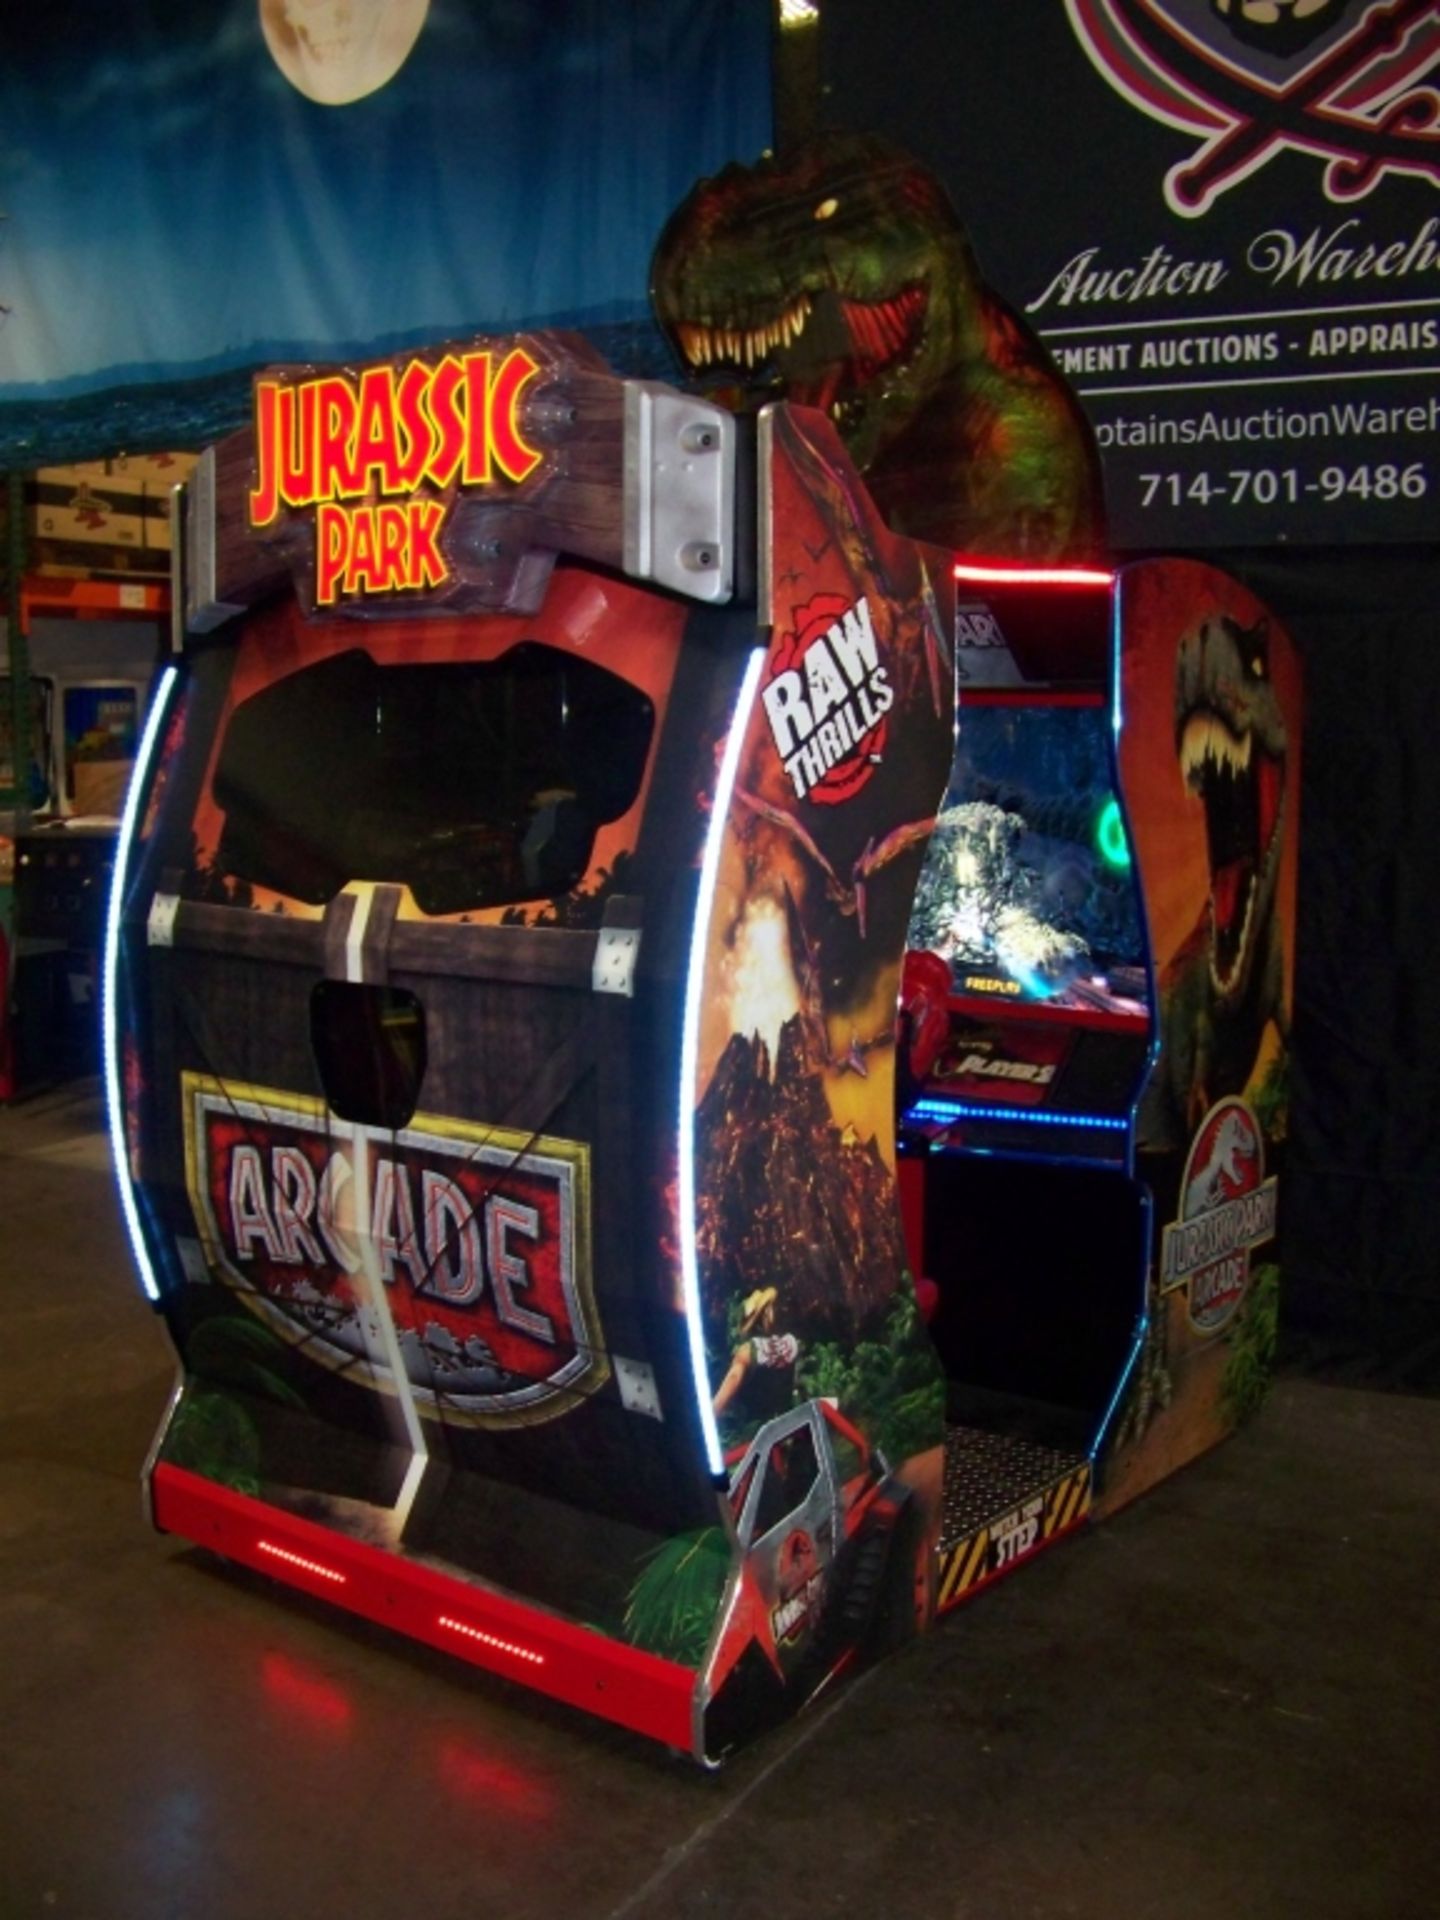 JURASSIC PARK DELUXE ARCADE GAME BRAND NEW!! Item is in used condition. Evidence of wear and